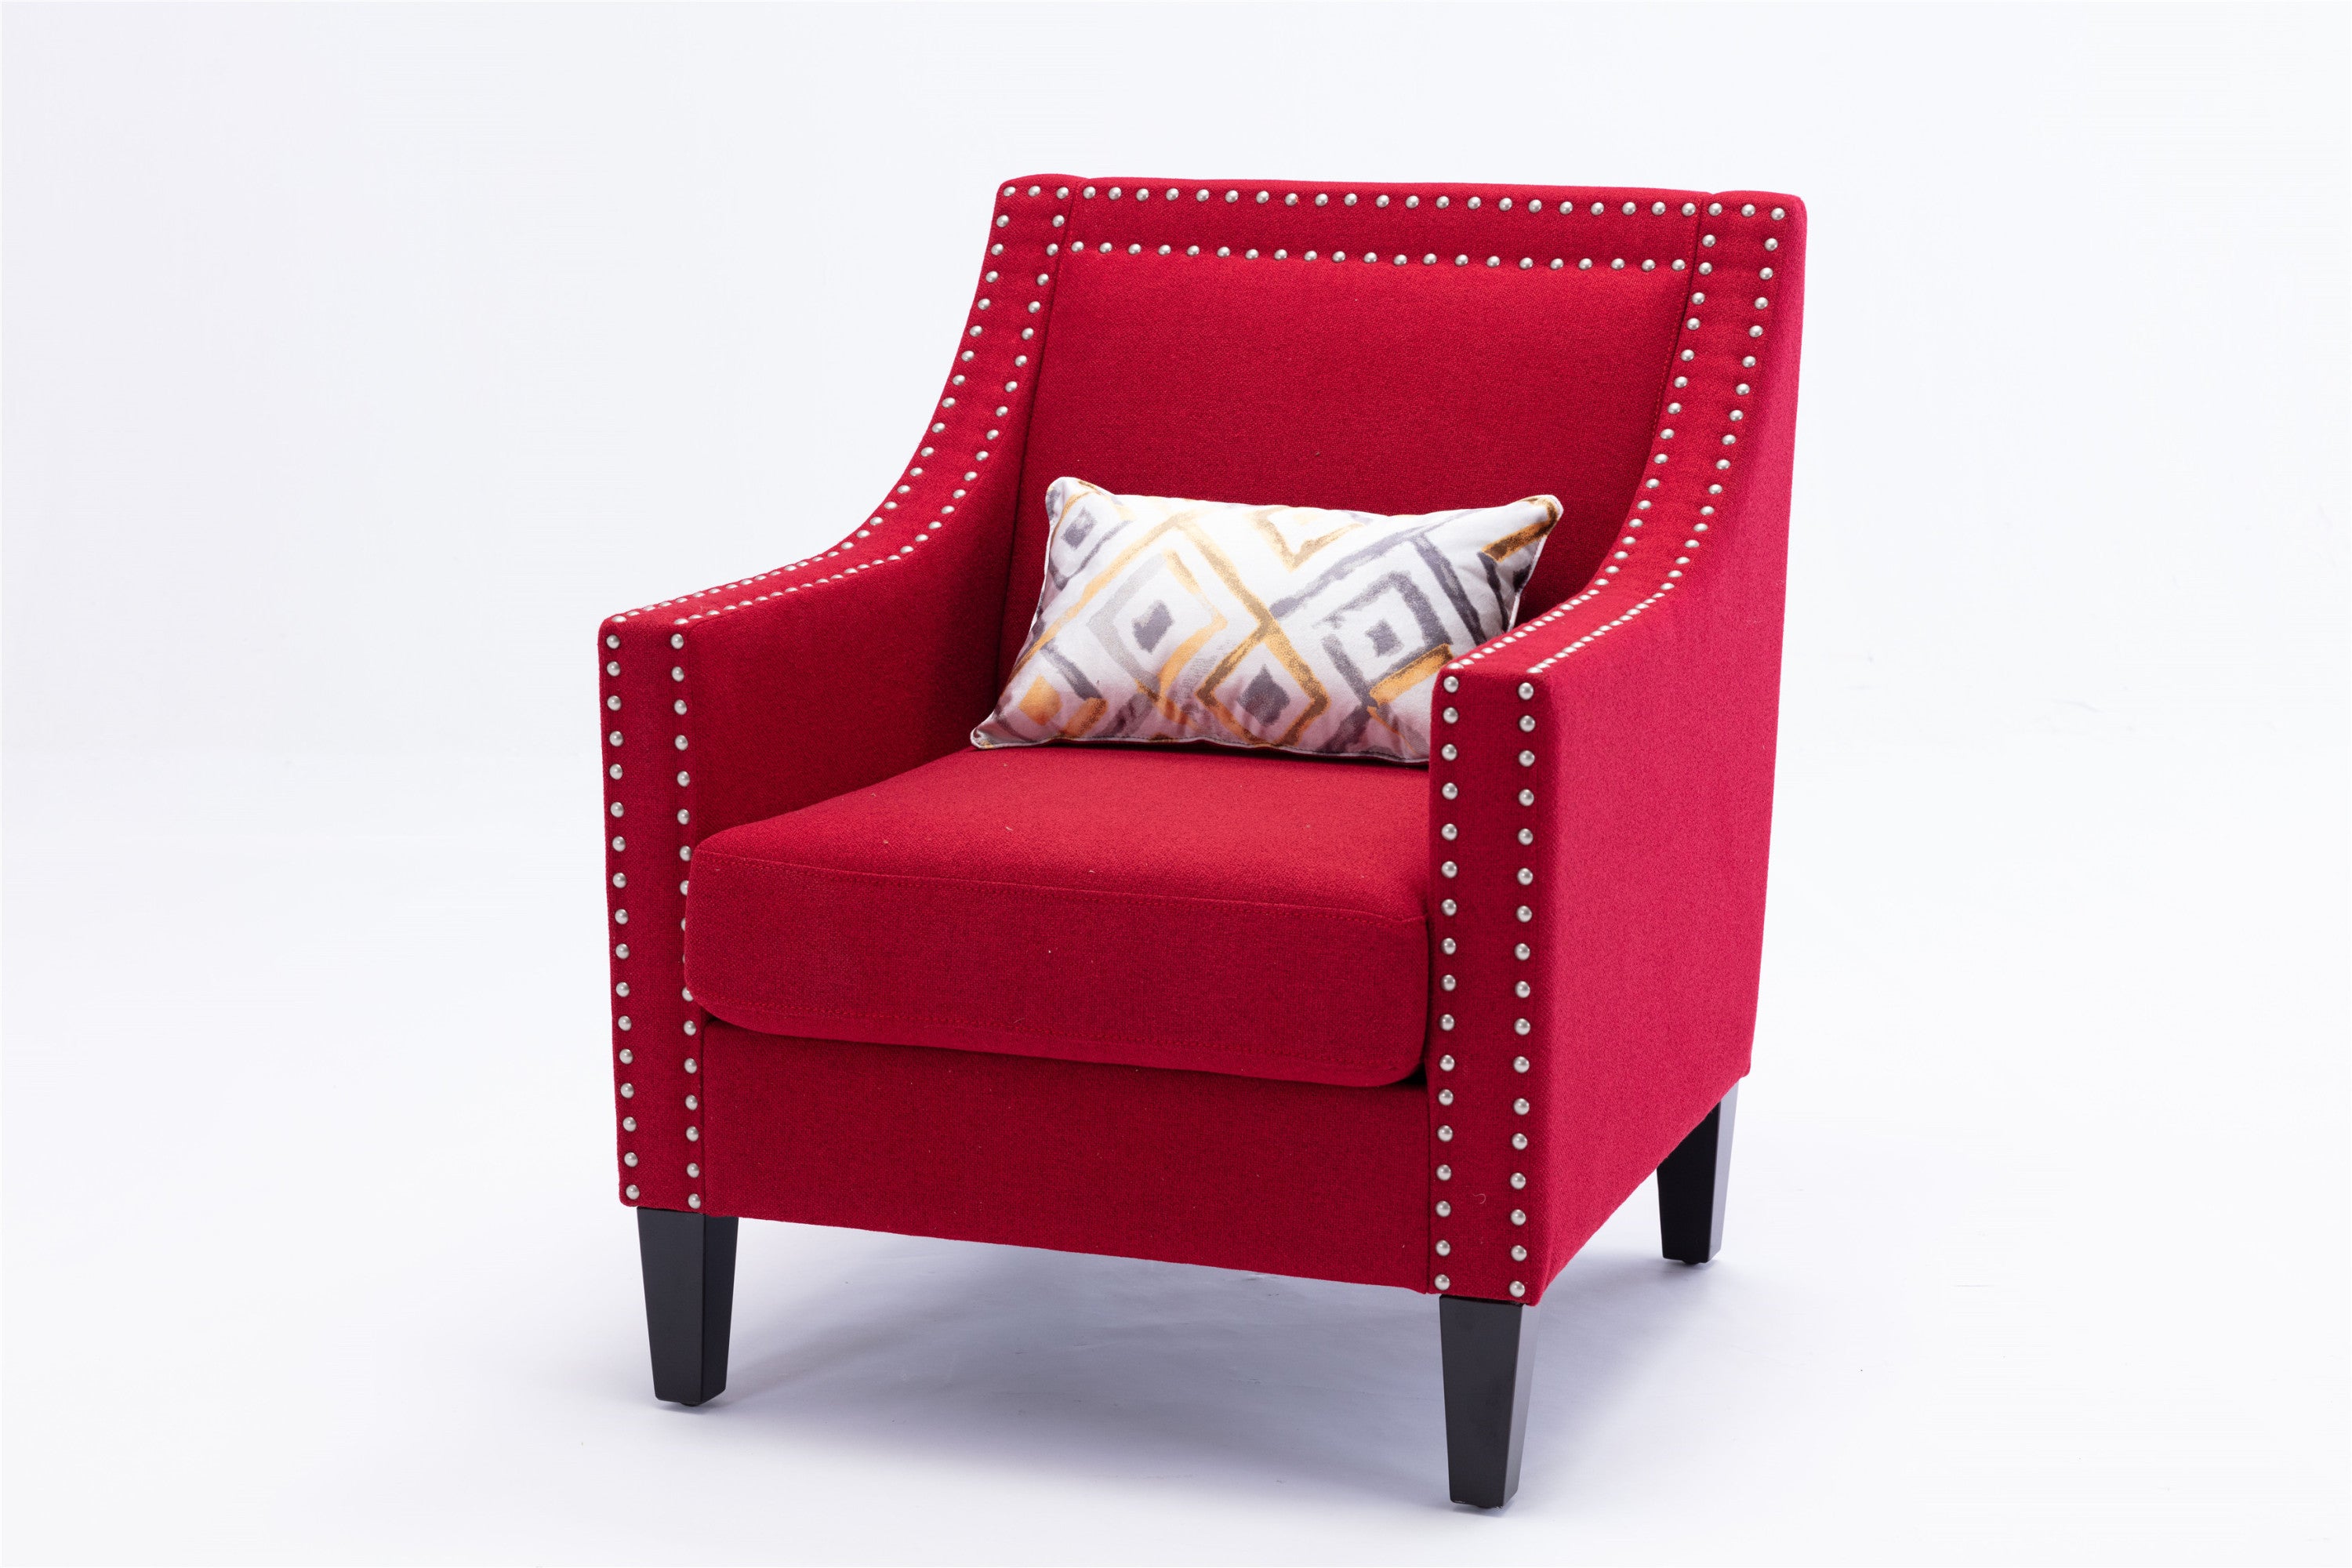 Vegas Red Linen Accent Chair With Tufted Back and Nailhead Trim